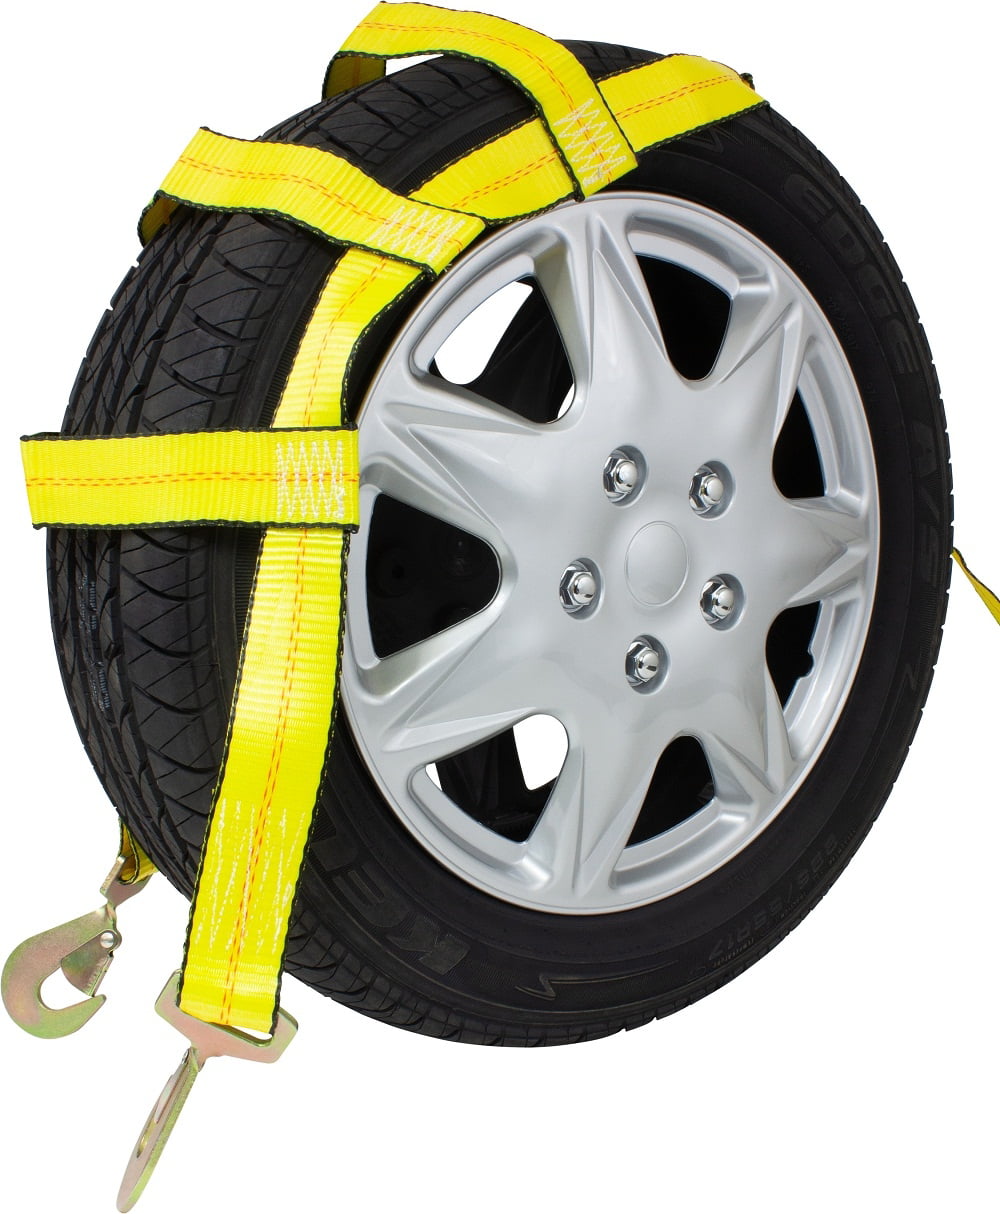 ALAVENTE Tow Dolly Basket Straps with Flat Hook for Small to Medium Size Tie Down Bonnet Wheel Ratchet Net 12000 lbs Breaking Strength 2 Packs 